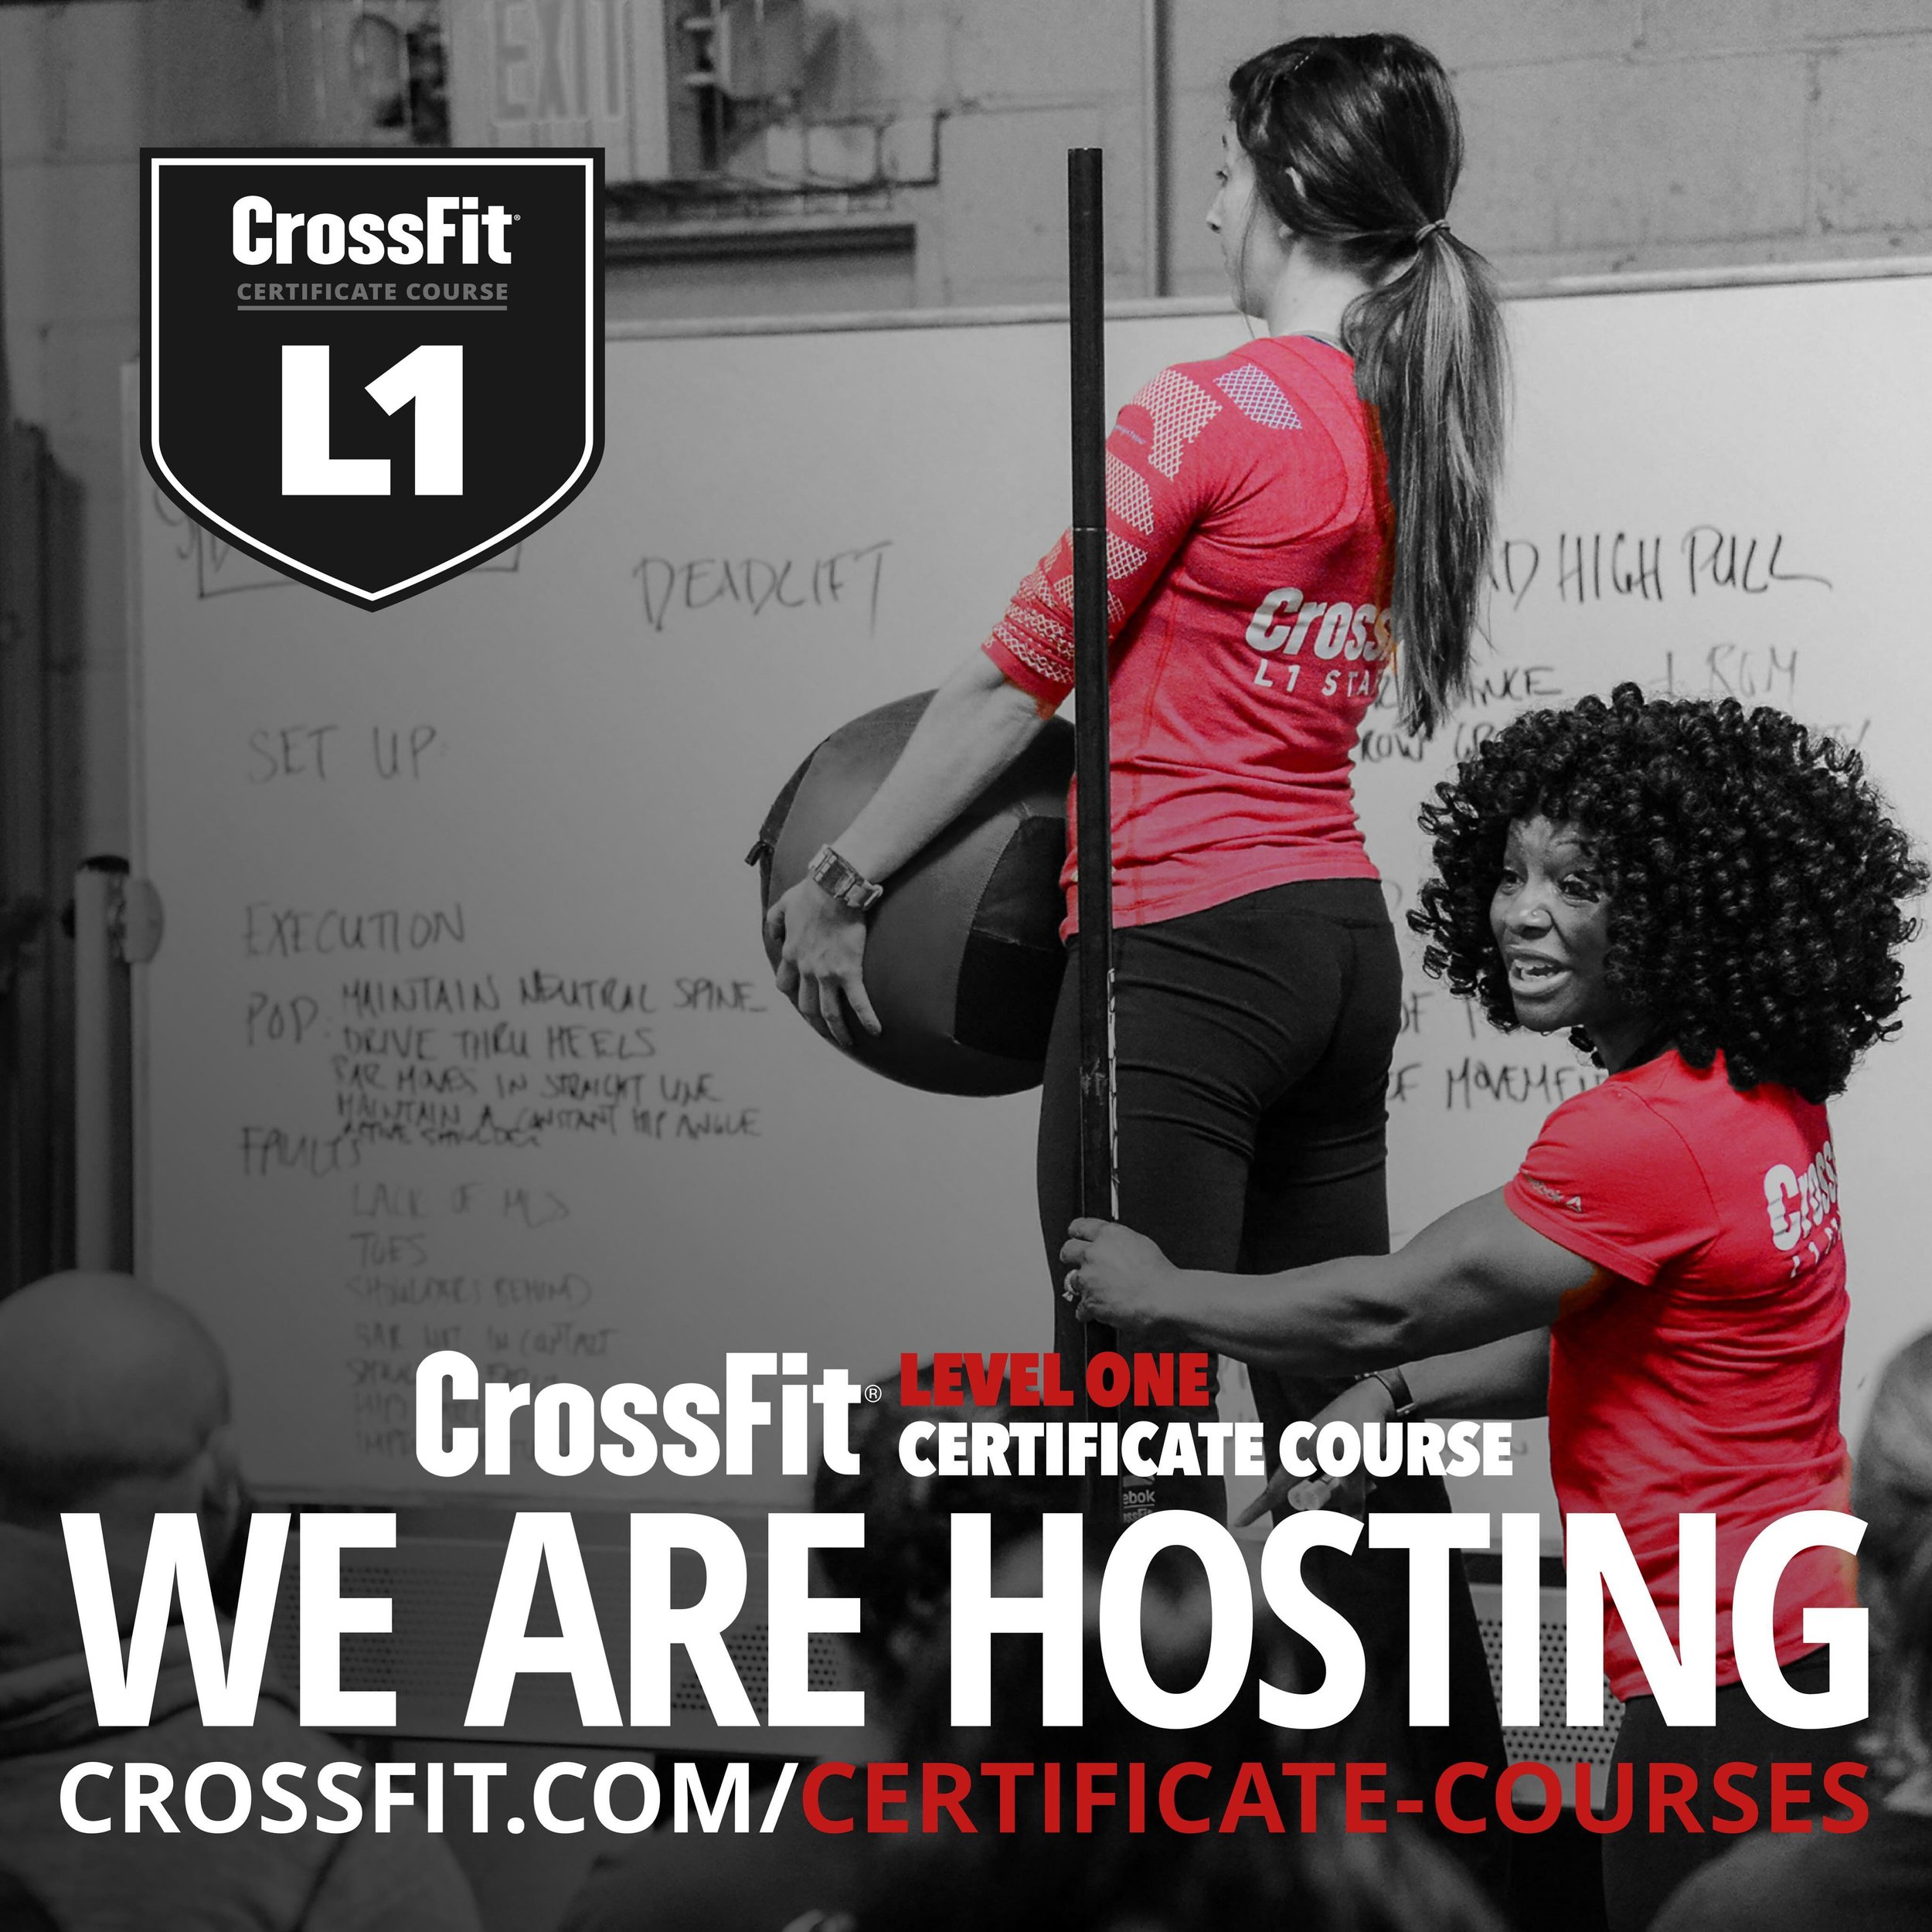 We have the honor of hosting an upcoming CrossFit Level 1 Certificate Course!

Whether you are an individual who wants to coach others or a CrossFit enthusiast who wants to learn more, this is a fantastic course led by the best of the best. We will b